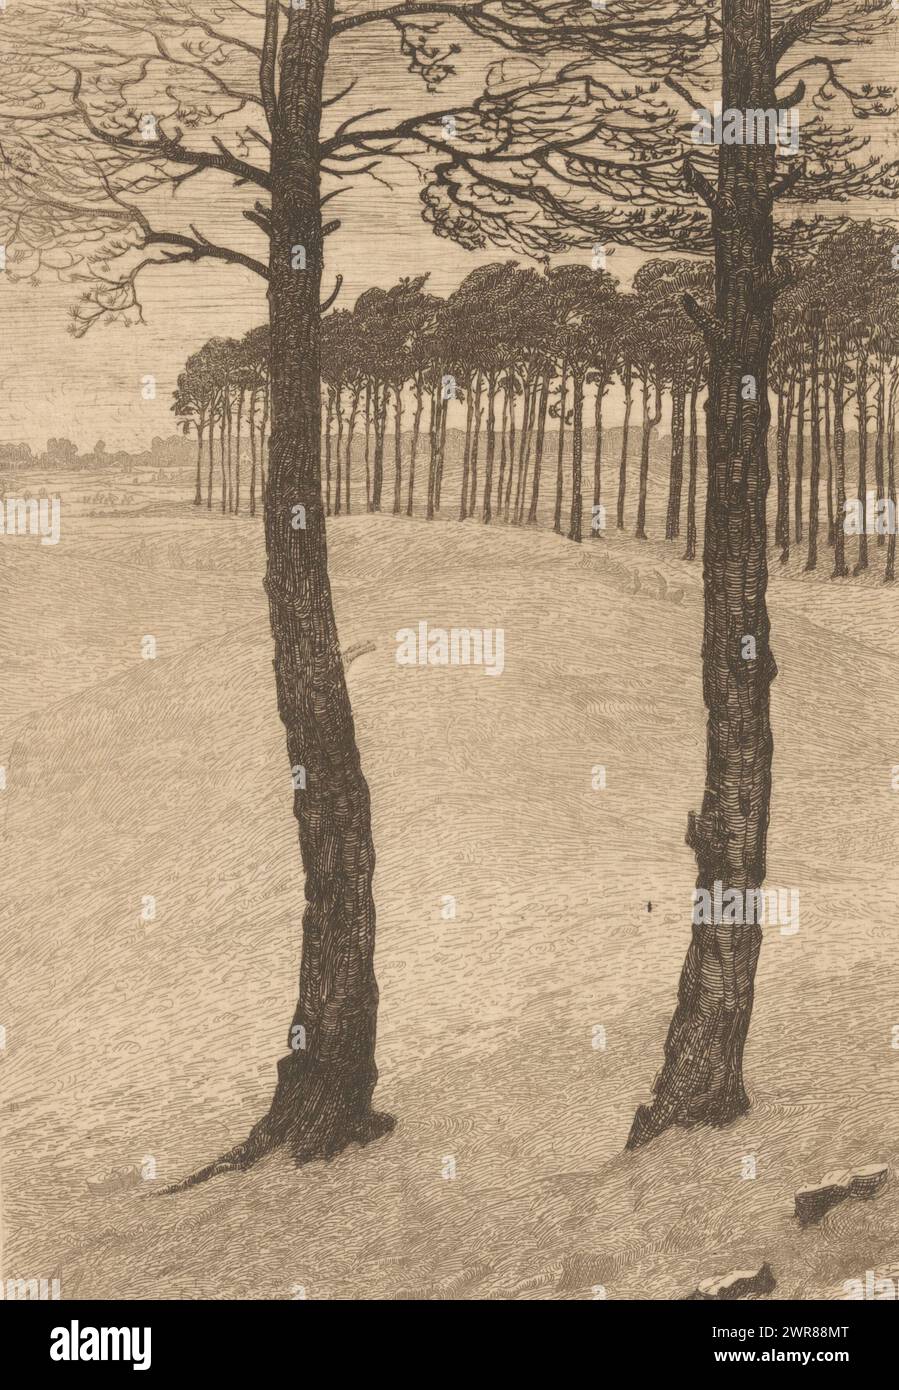 Pine trees in dune landscape, print maker: Maurits van der Valk, 1867 - 1935, paper, etching, drypoint, height 199 mm × width 140 mm, print Stock Photo